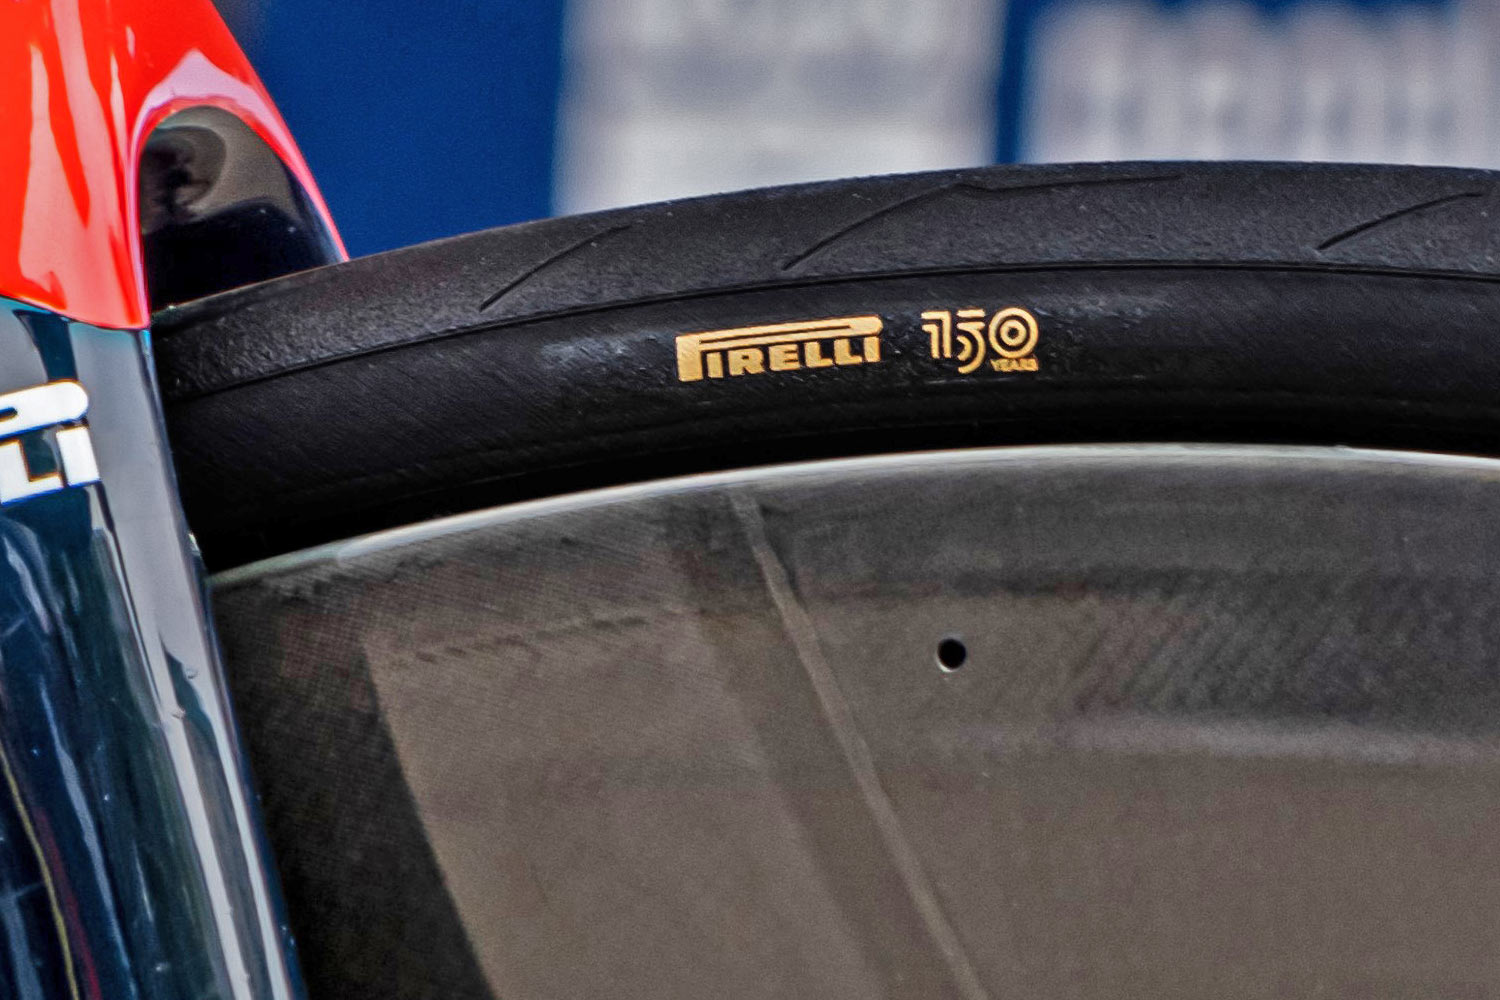 Pirelli P Zero Race 150th anniversary limited edition road bike tires made-in-Italy, gold logo